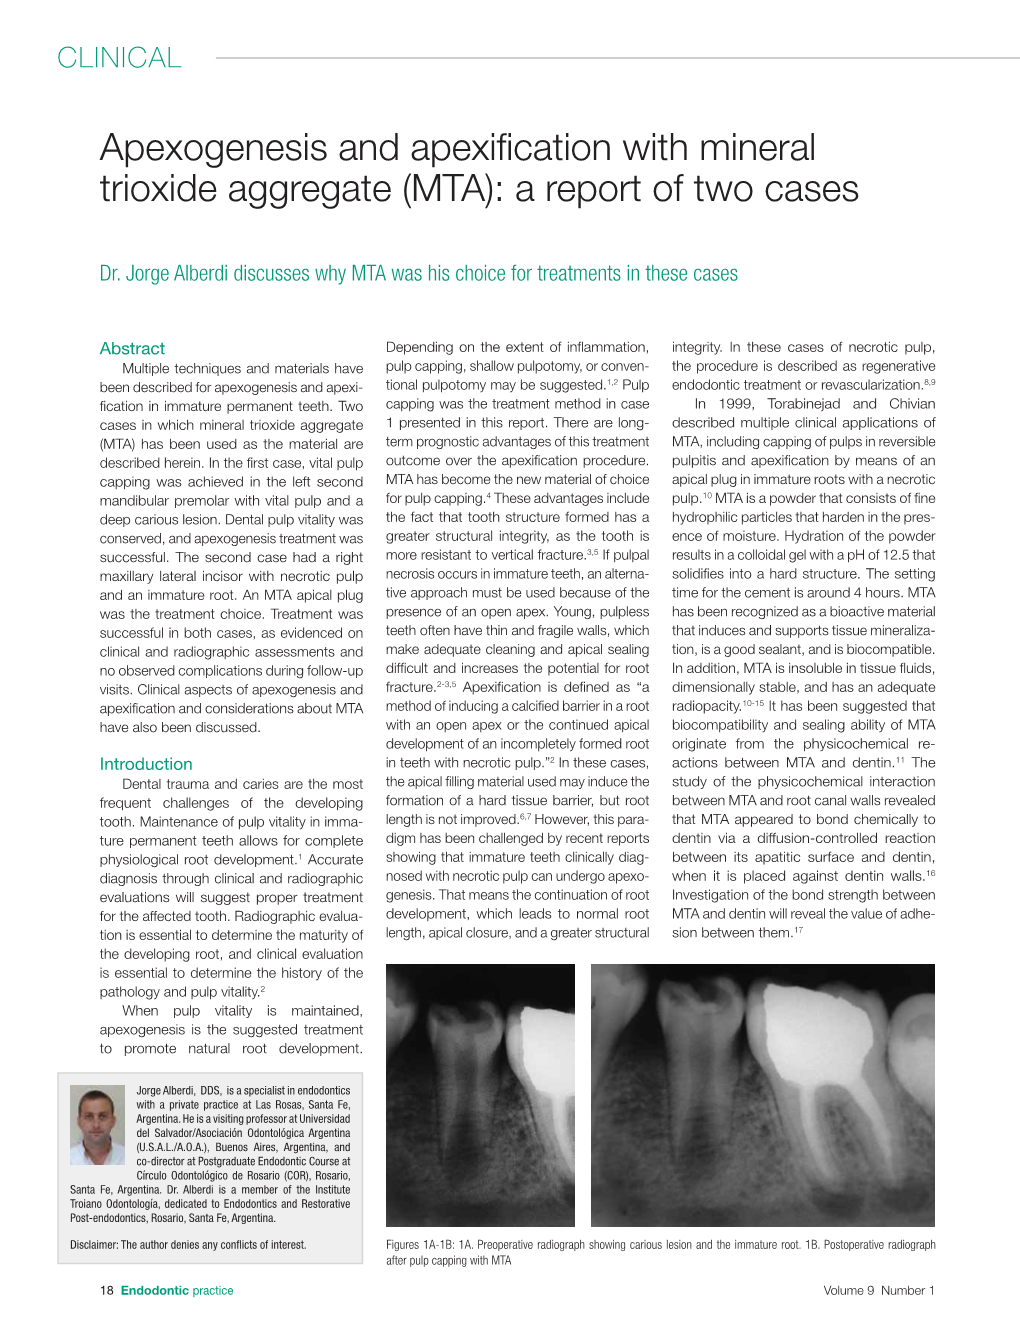 Apexogenesis and Apexification with Mineral Trioxide Aggregate (MTA): a Report of Two Cases